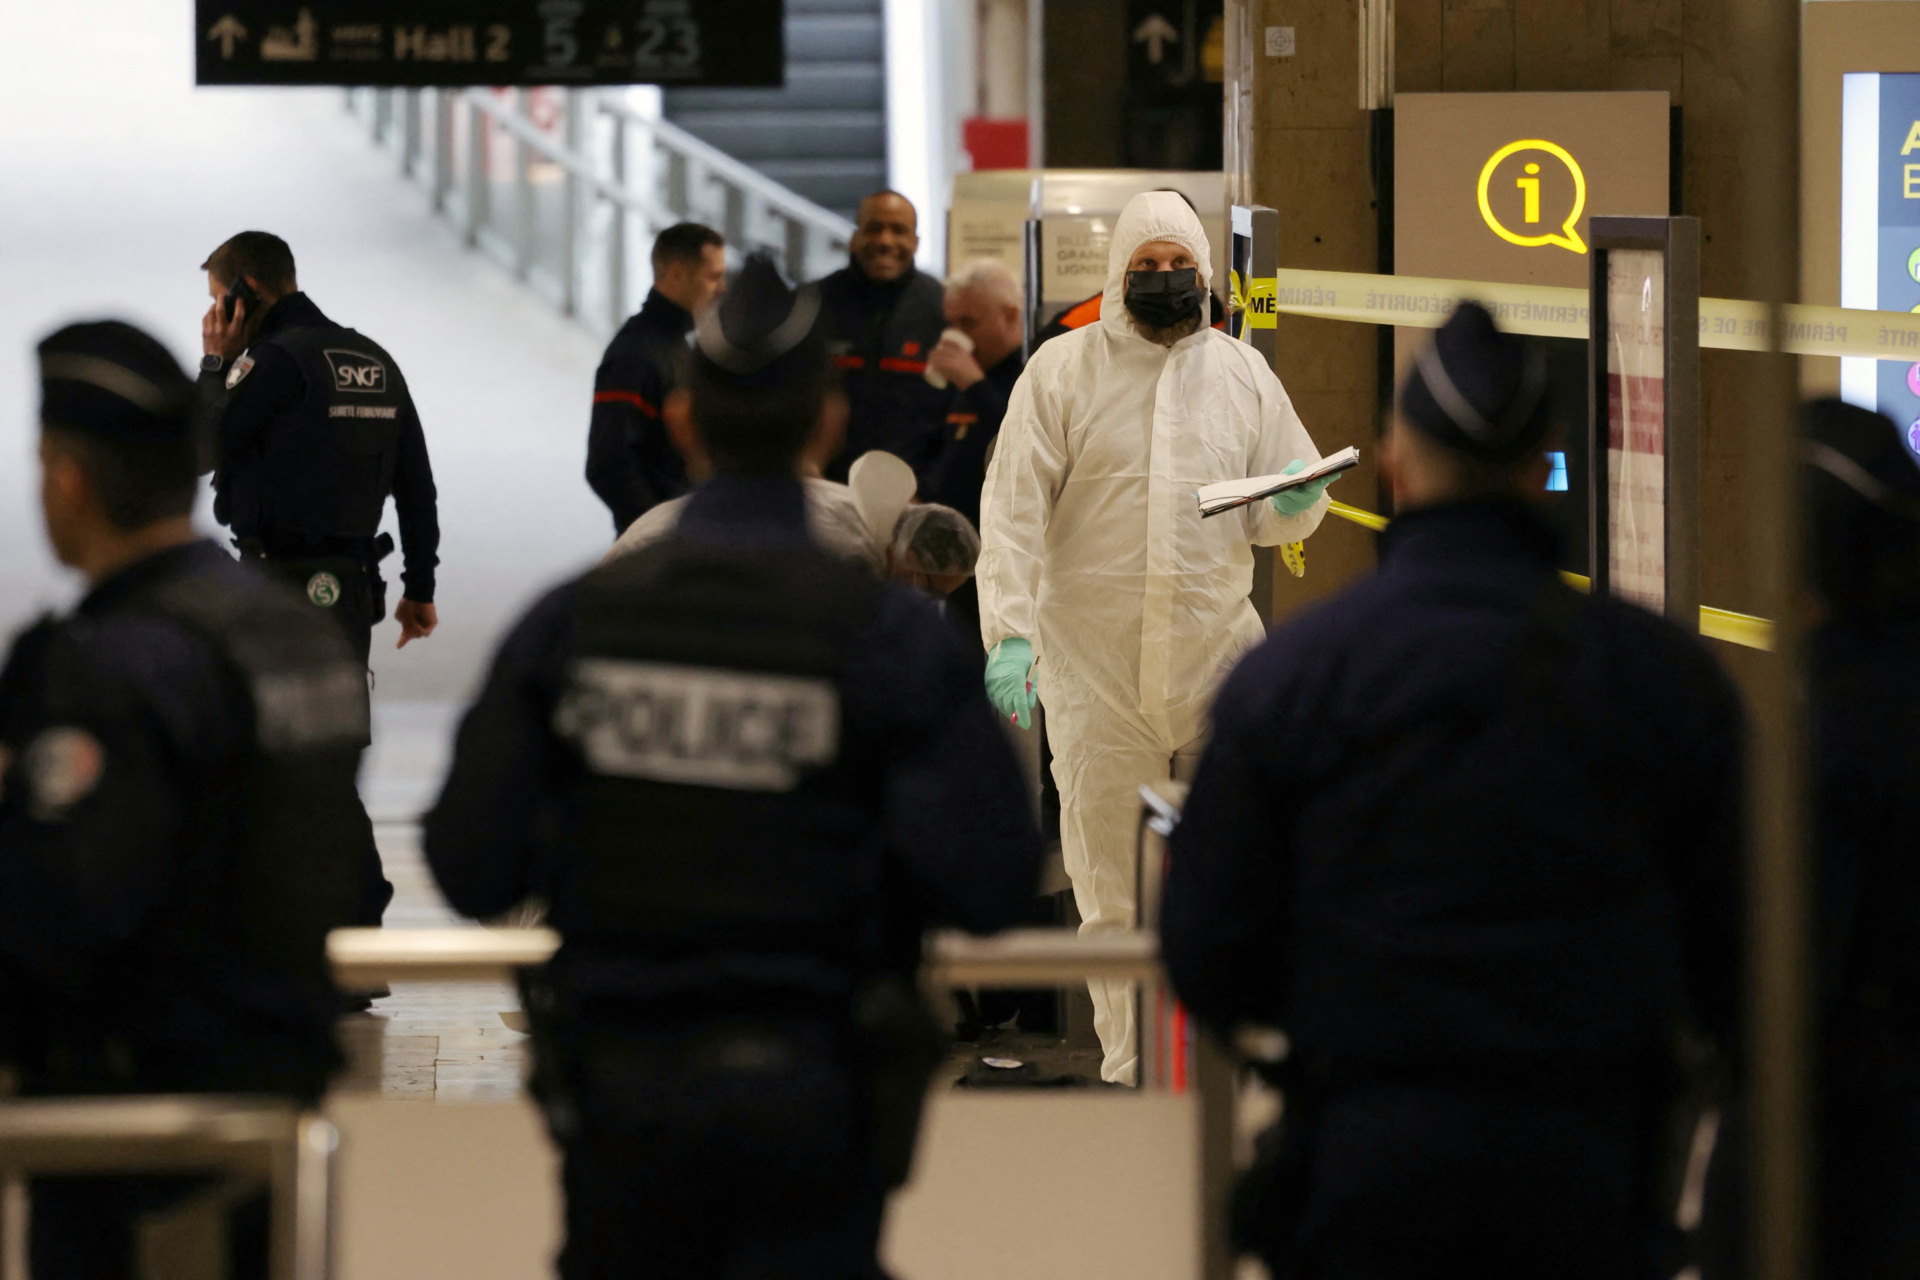 French forensic experts and police work after a knife attack at Paris's Gare de Lyon railway station, a major travel hub on February 3, 2024. Police said that the suspected attacker had been arrested and that the motives behind the attack were unclear. The 8:00 am (0700 GMT) attack left one person with serious injuries while two others were lightly wounded. (Photo by Thomas SAMSON / AFP) (Photo by THOMAS SAMSON/AFP via Getty Images)